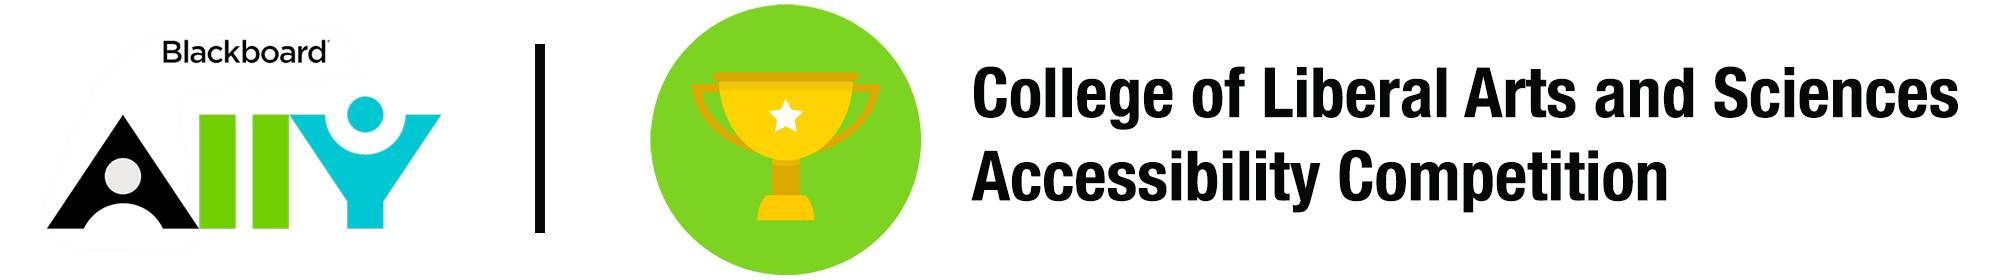 College of Liberal Arts and Sciences Accessibility Competition